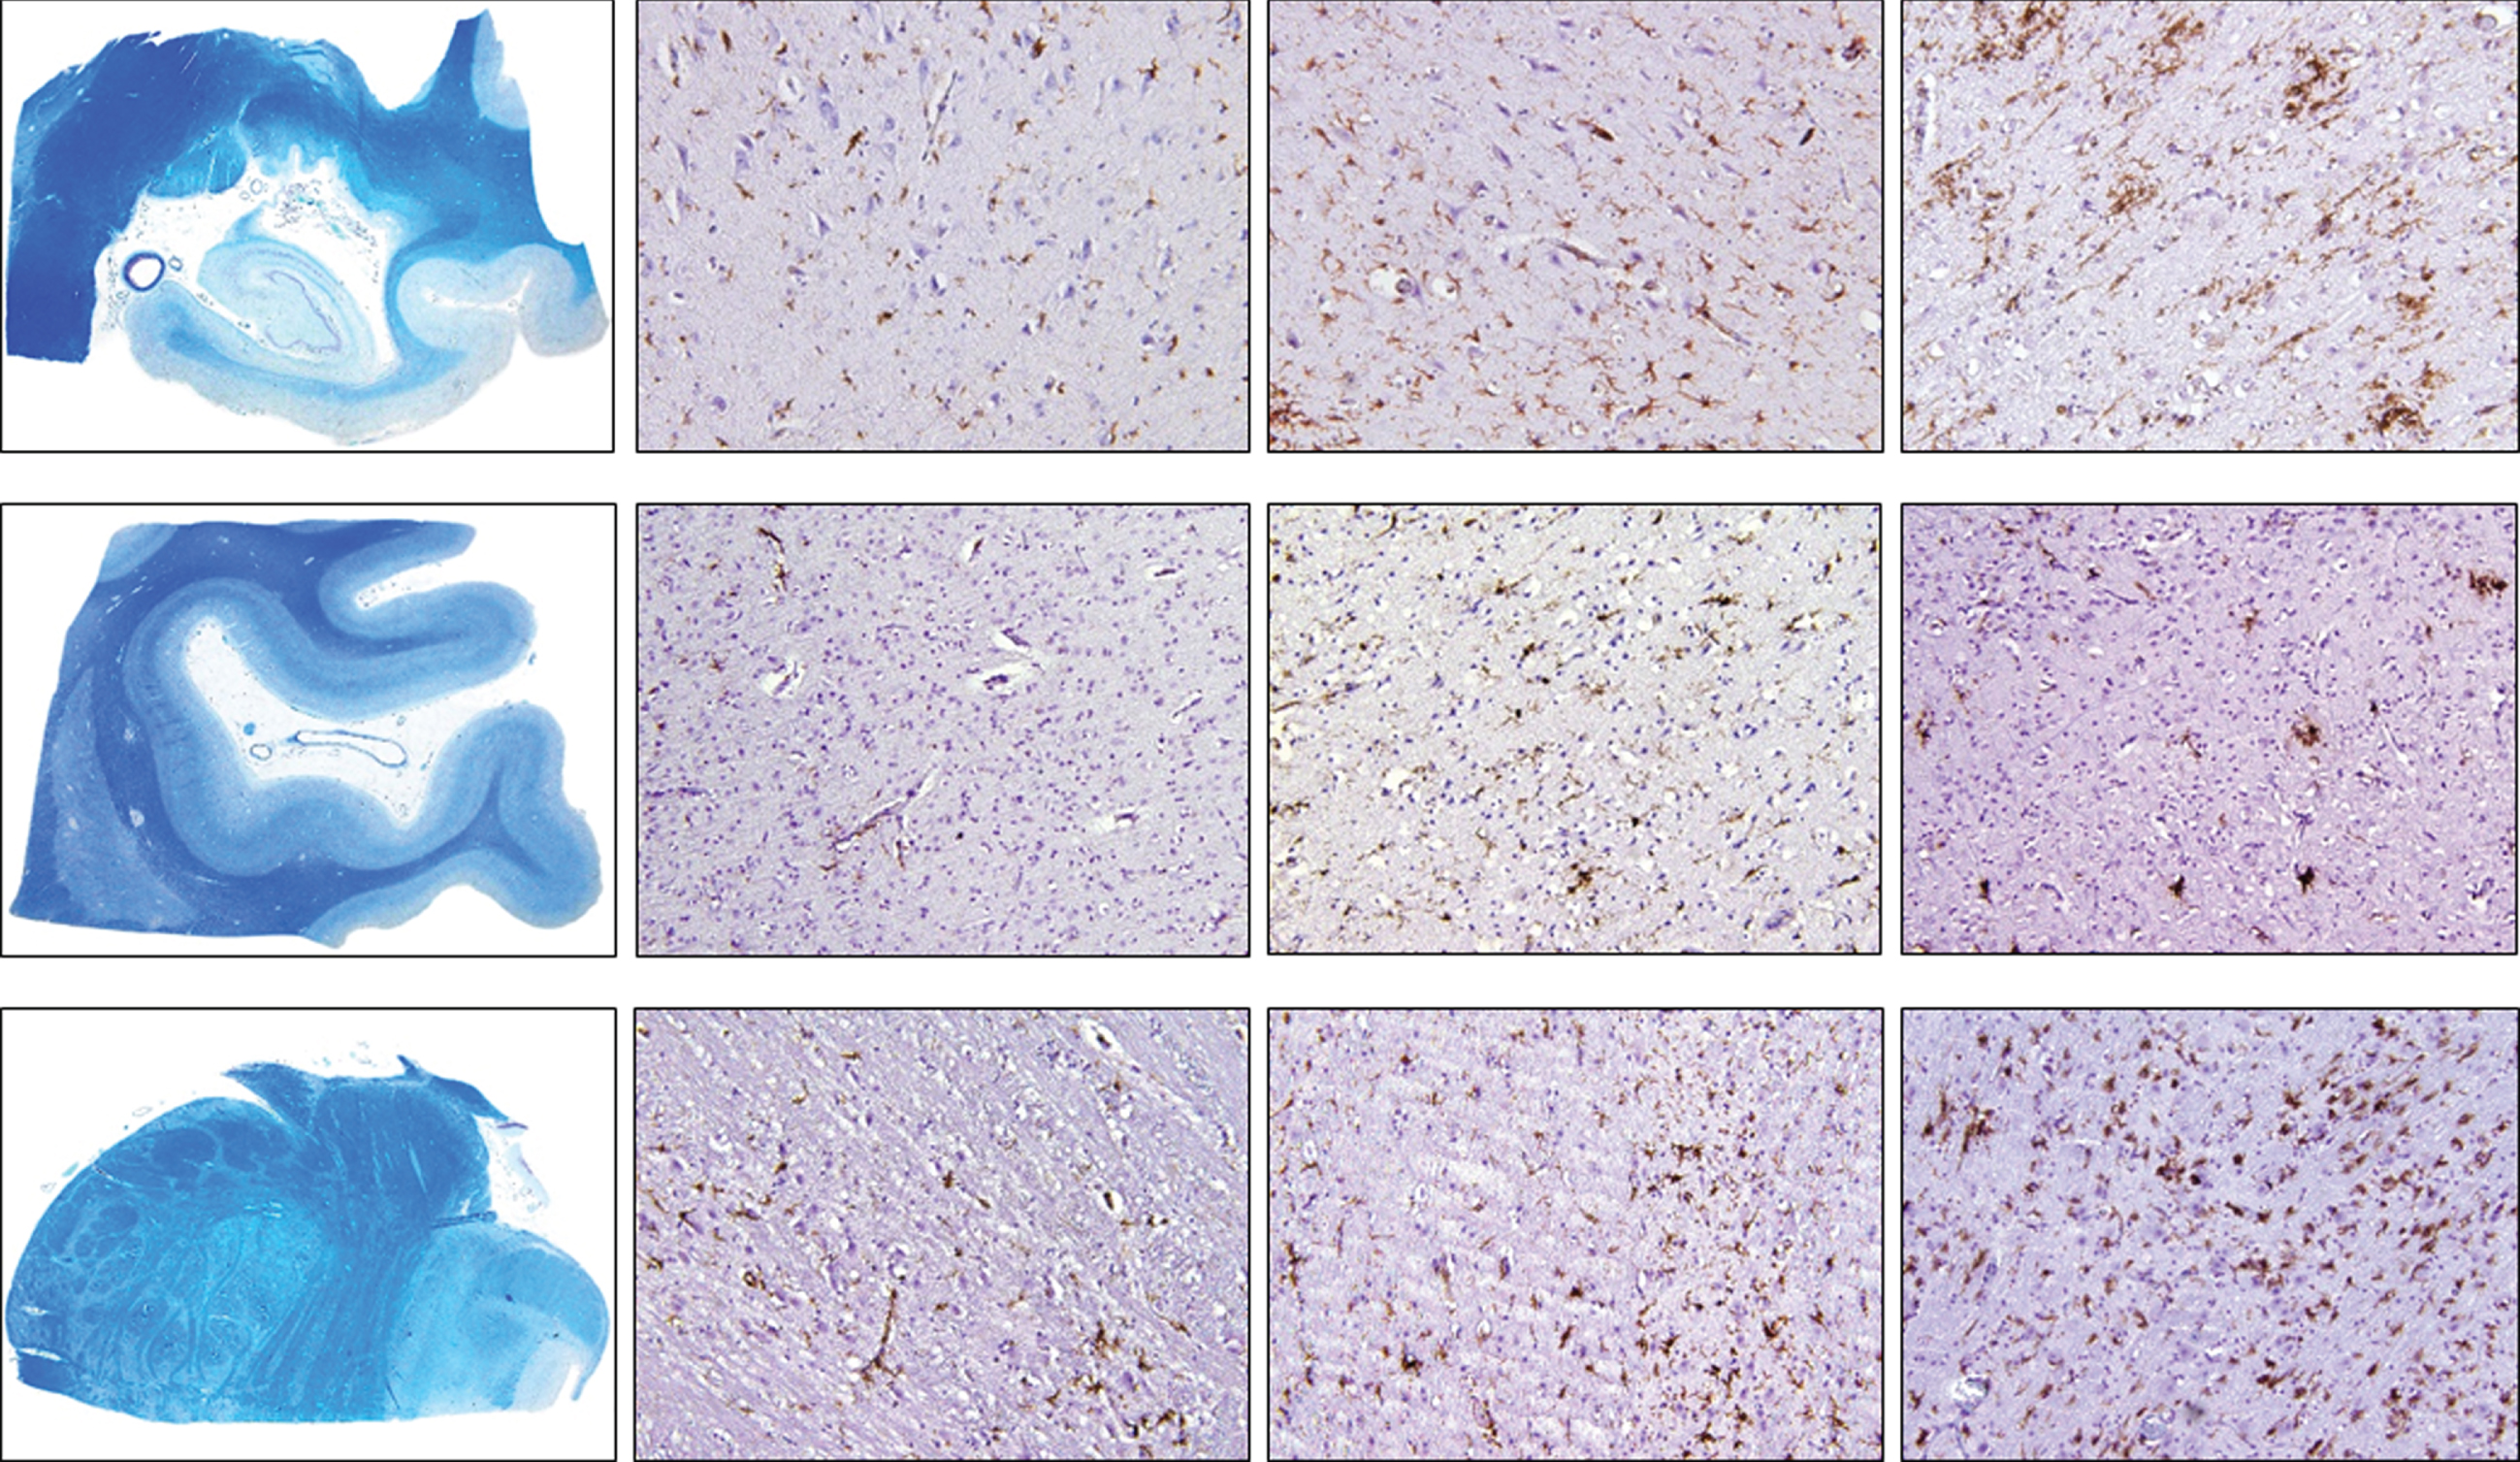 Density of HLA-DR-positive cells in control, intermediate and late AD, respectively (upper row, hippocampus; middle row, occipital cortex, lower row, brainstem) (magnification 100x).